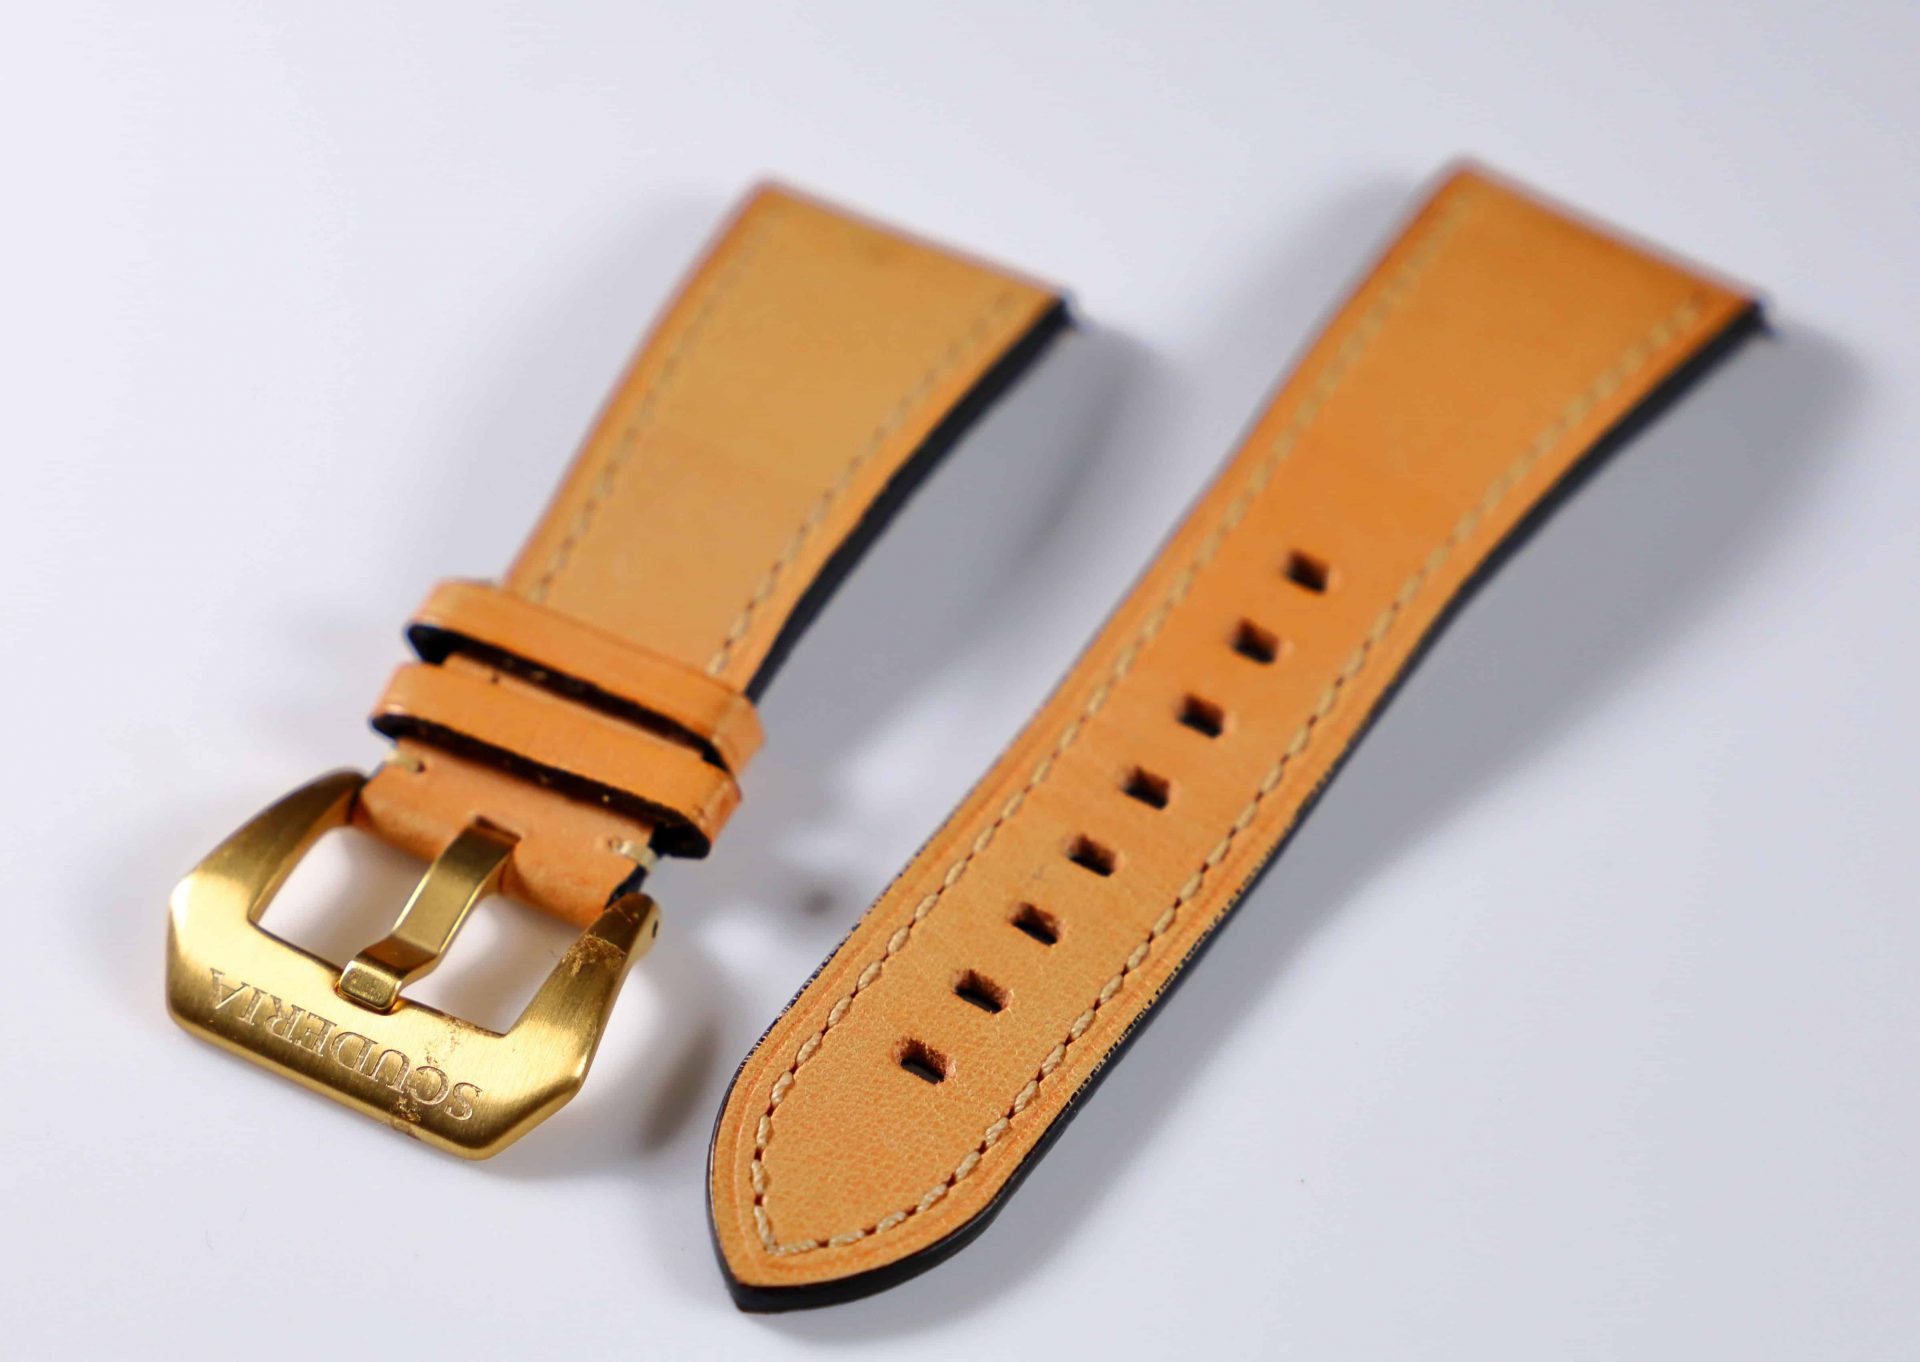 CT Scuderia Leather Strap with Scuderia Tang Buckle - Rare Watch Parts